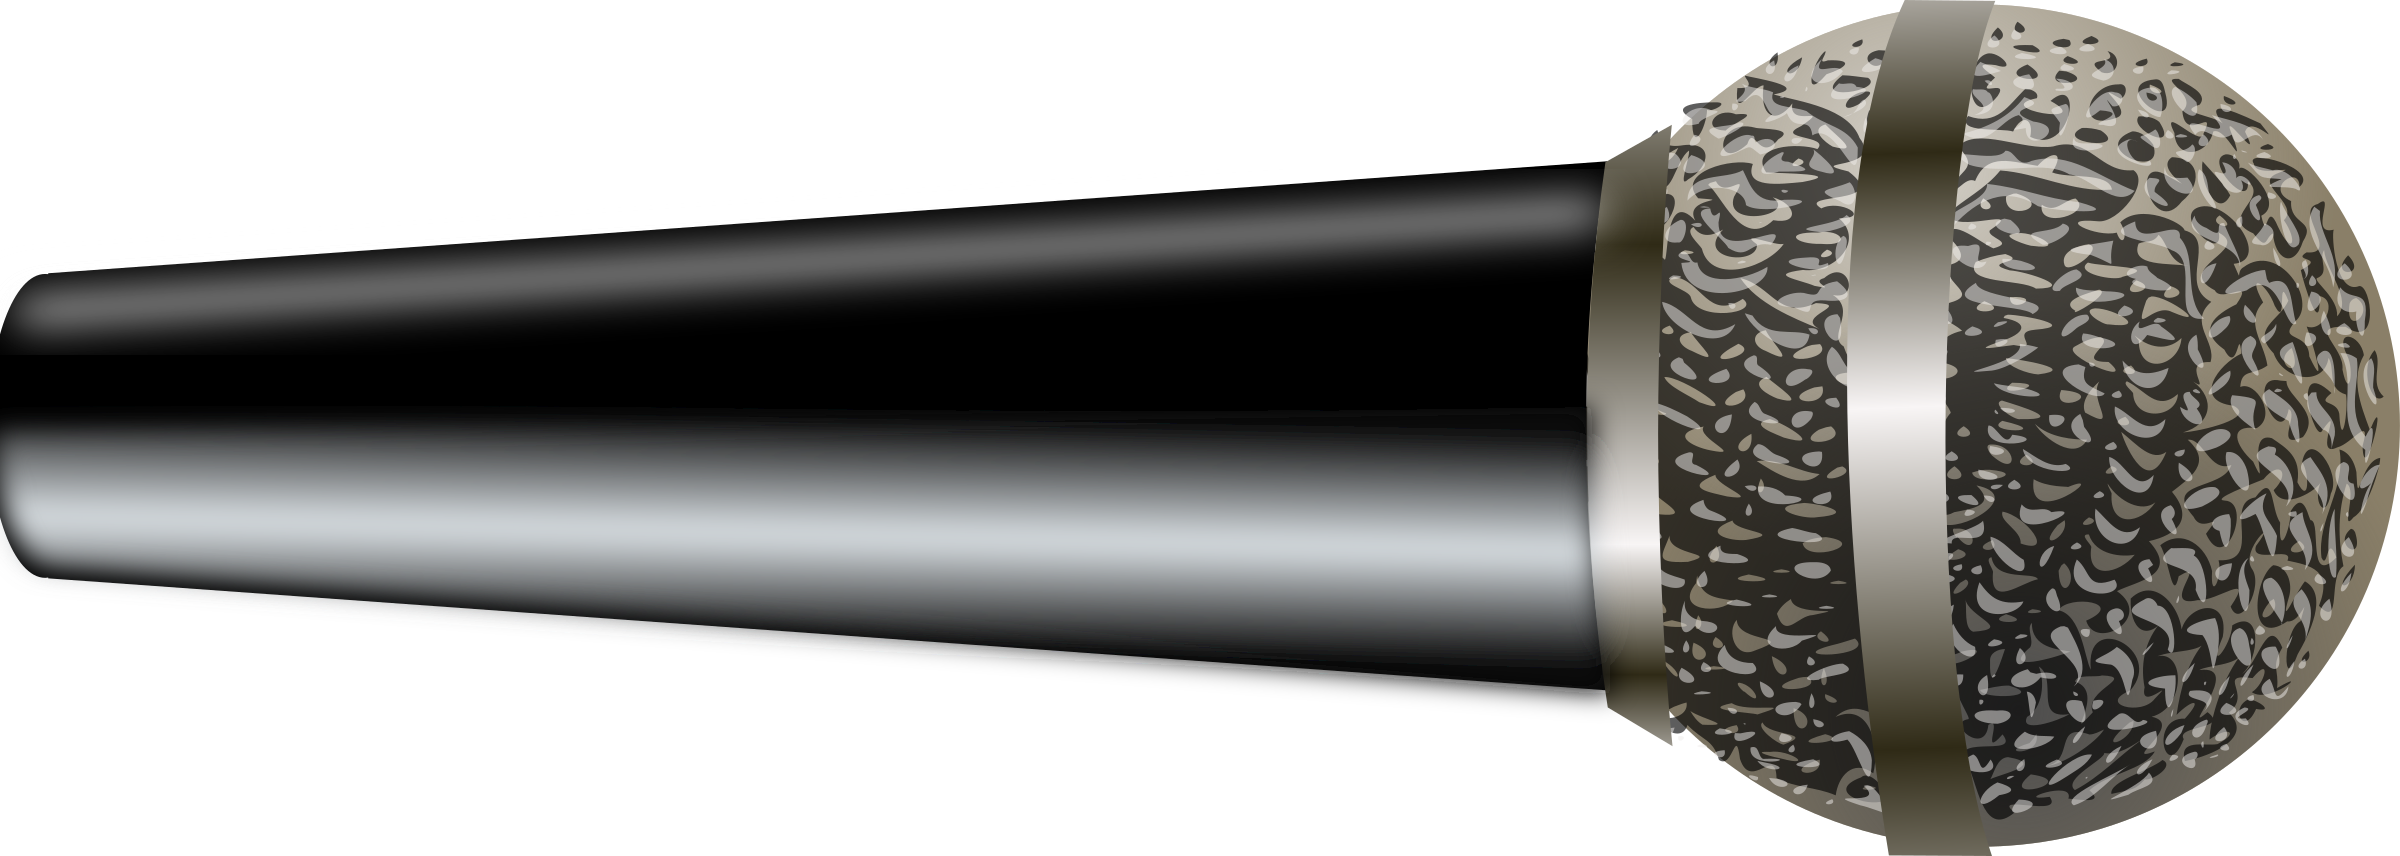 Download PNG image - Microphone Transparent PNG 